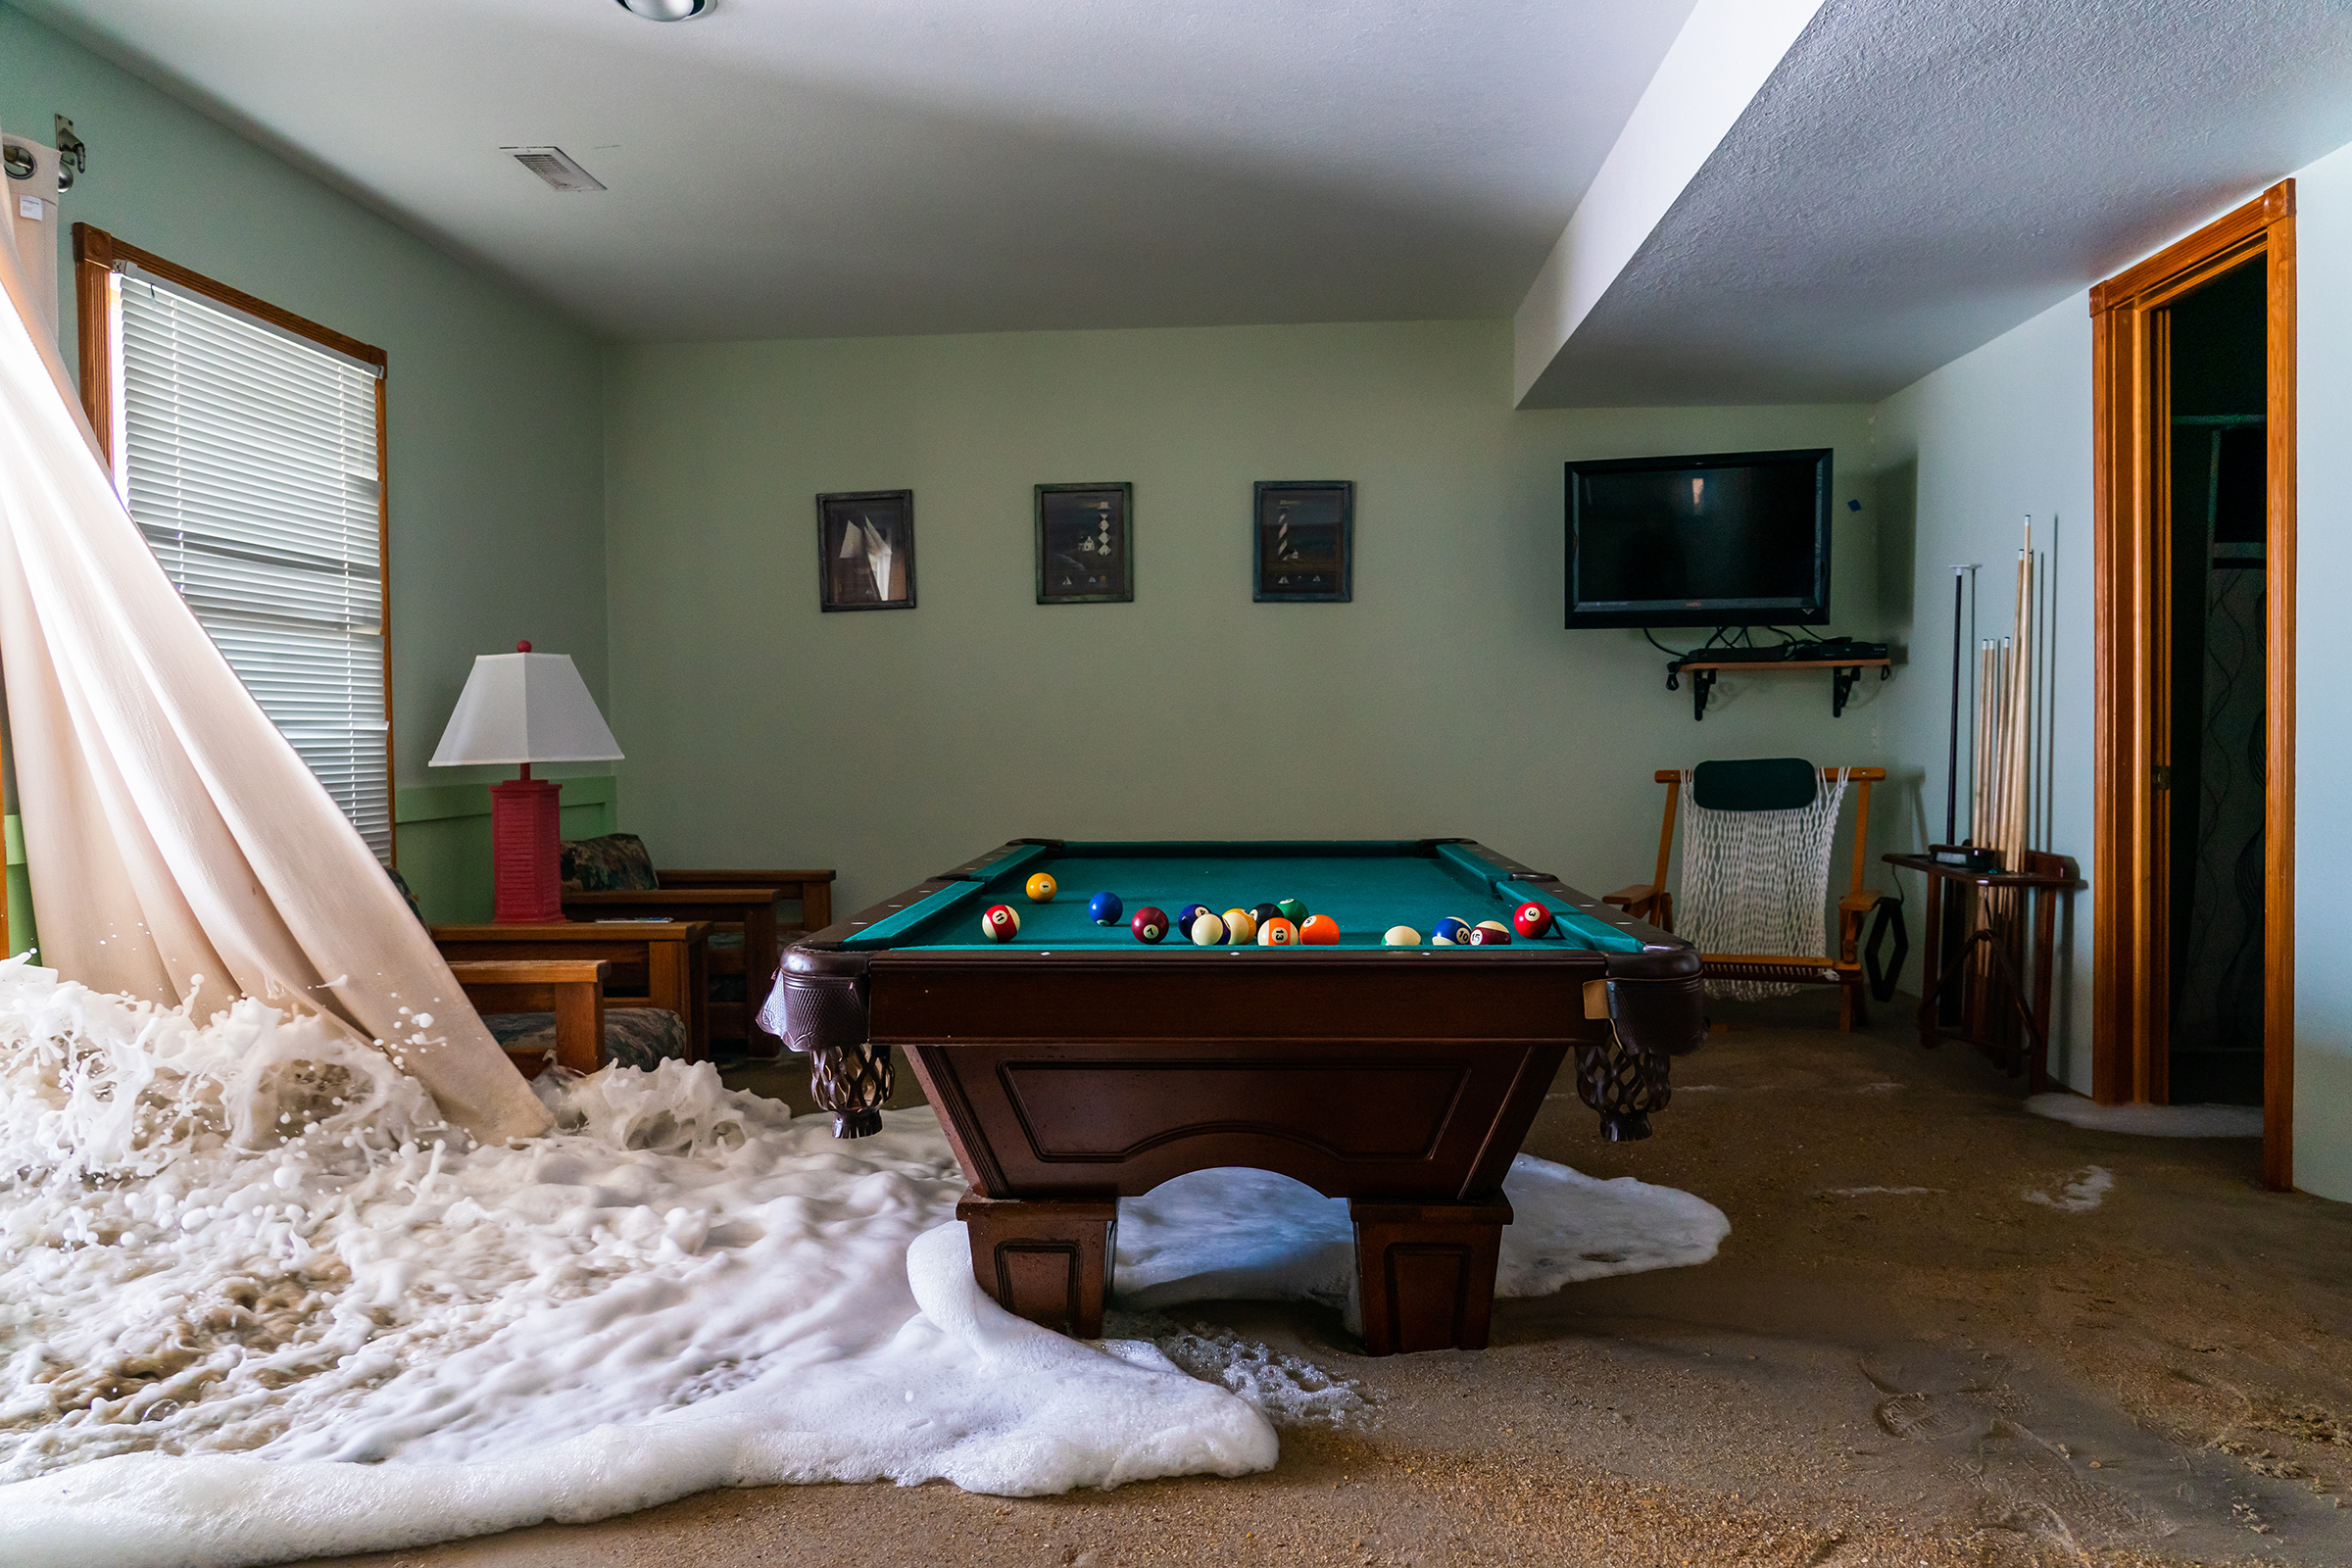 The Atlantic Ocean surges its way into a rental beach house in Avon, N.C., on Sept. 22. Hurricane Teddy was spinning just off the coast, causing higher than normal tides and tidal surges that were inundating low-lying homes and rental properties. (Daniel Pullen)